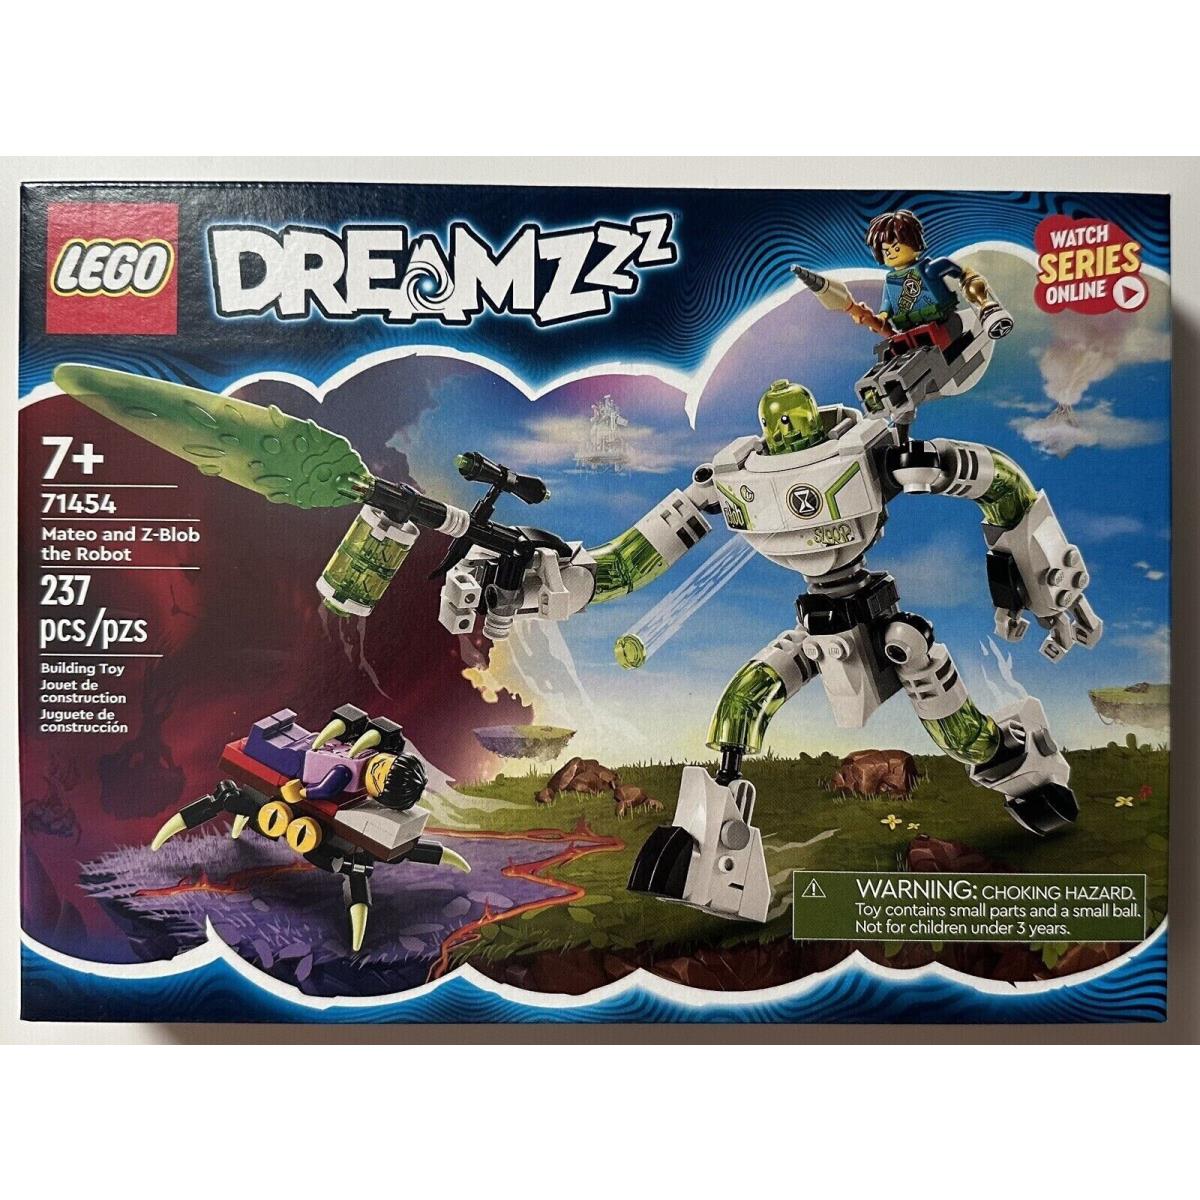 Lego Dreamzzz: Mateo and Z-blob The Robot 71454